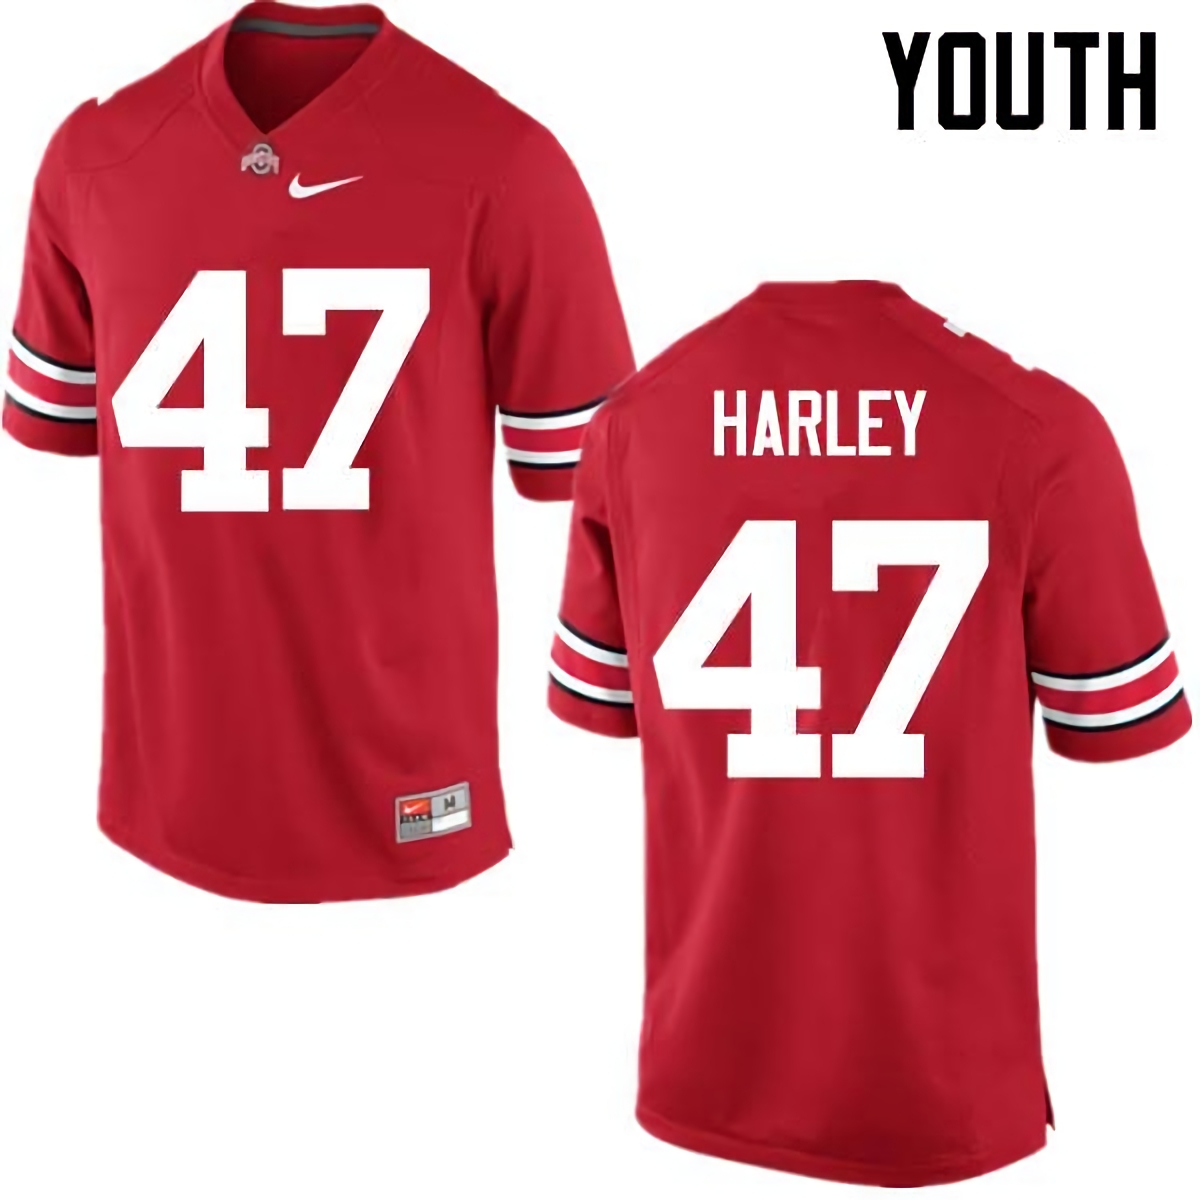 Chic Harley Ohio State Buckeyes Youth NCAA #47 Nike Red College Stitched Football Jersey TND1456TU